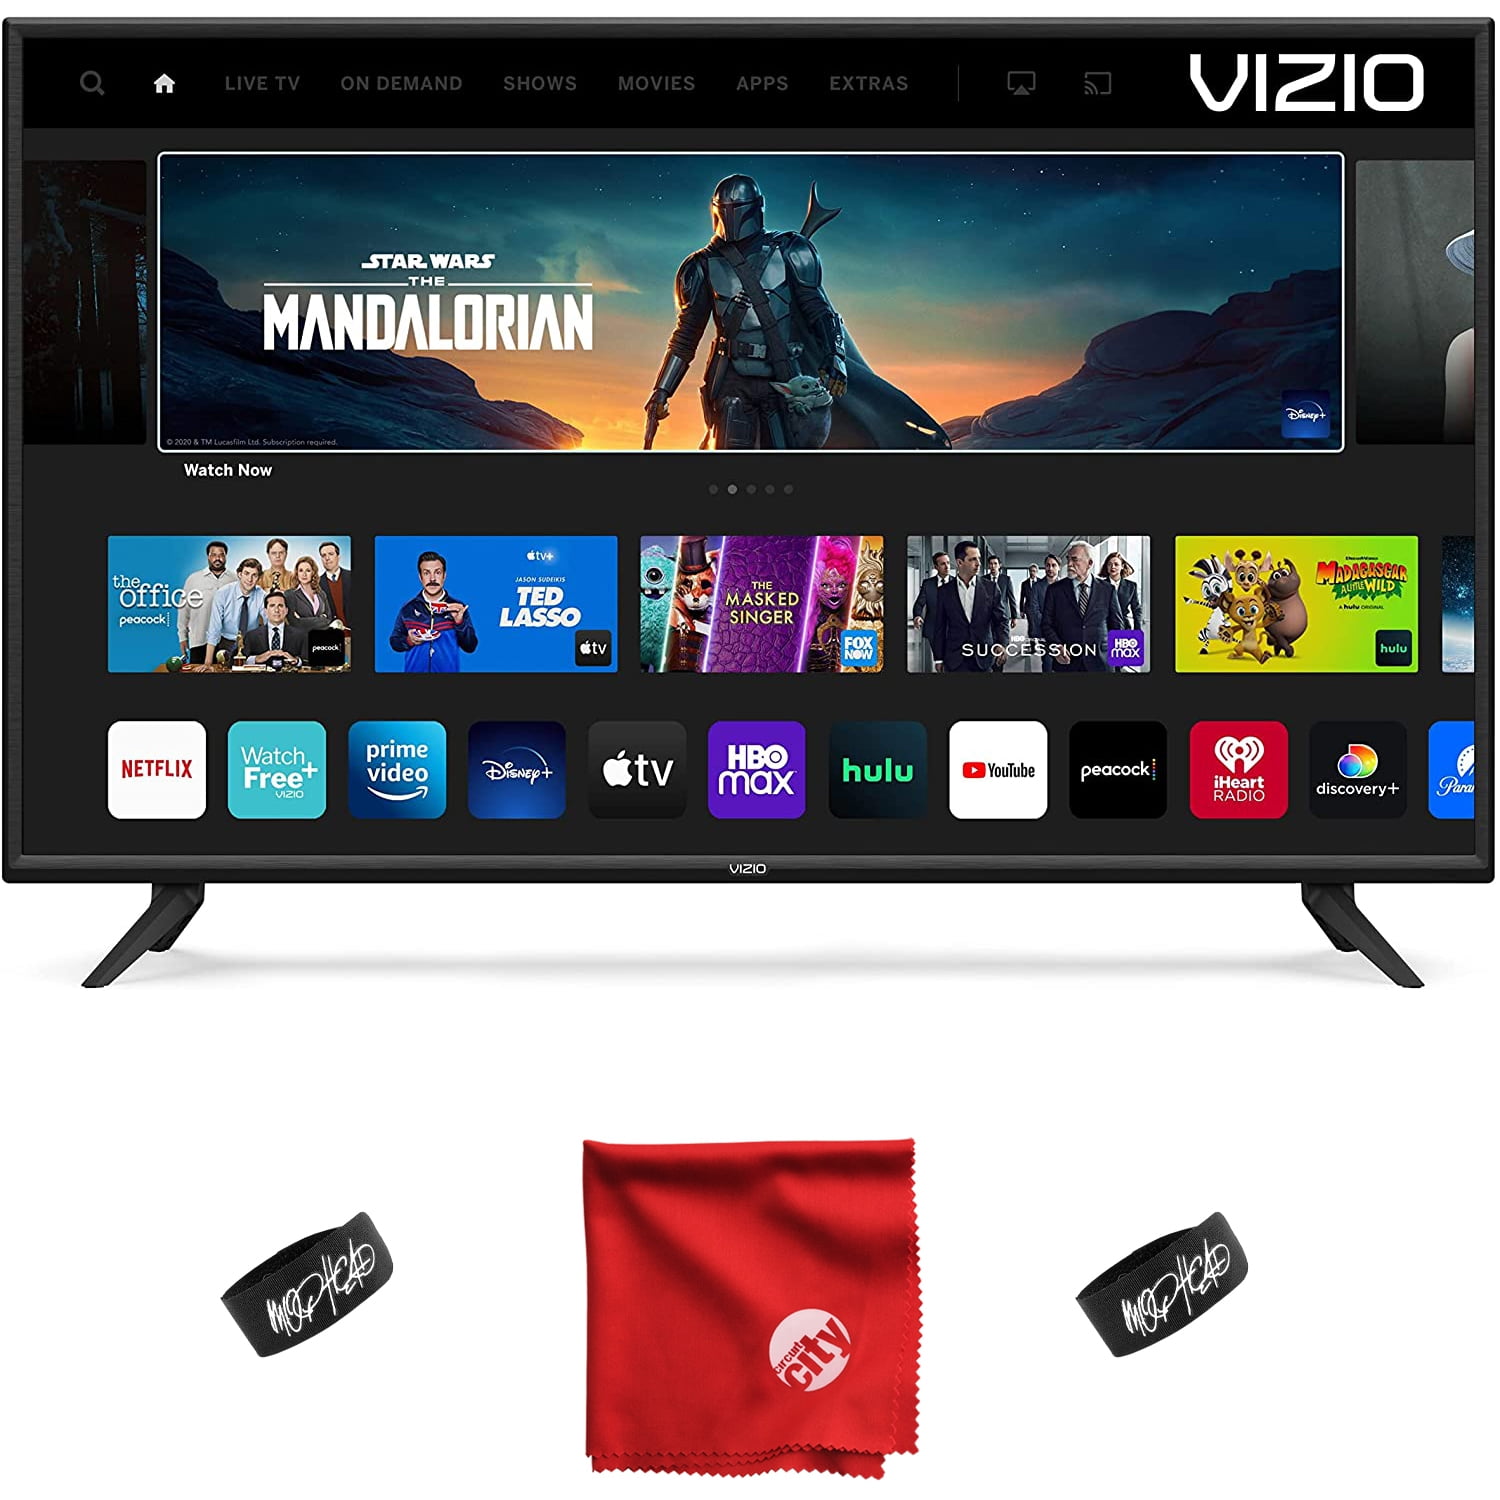 VIZIO V-Series 50-Inch 2160p 4K UHD LED Smart TV (V505-G19) with Built-in HDMI, USB, Dolby Vision HDR, Voice Control Bundle with Circuit City 6-Feet Ultra High Definition 4K HDMI Cable and Accessories